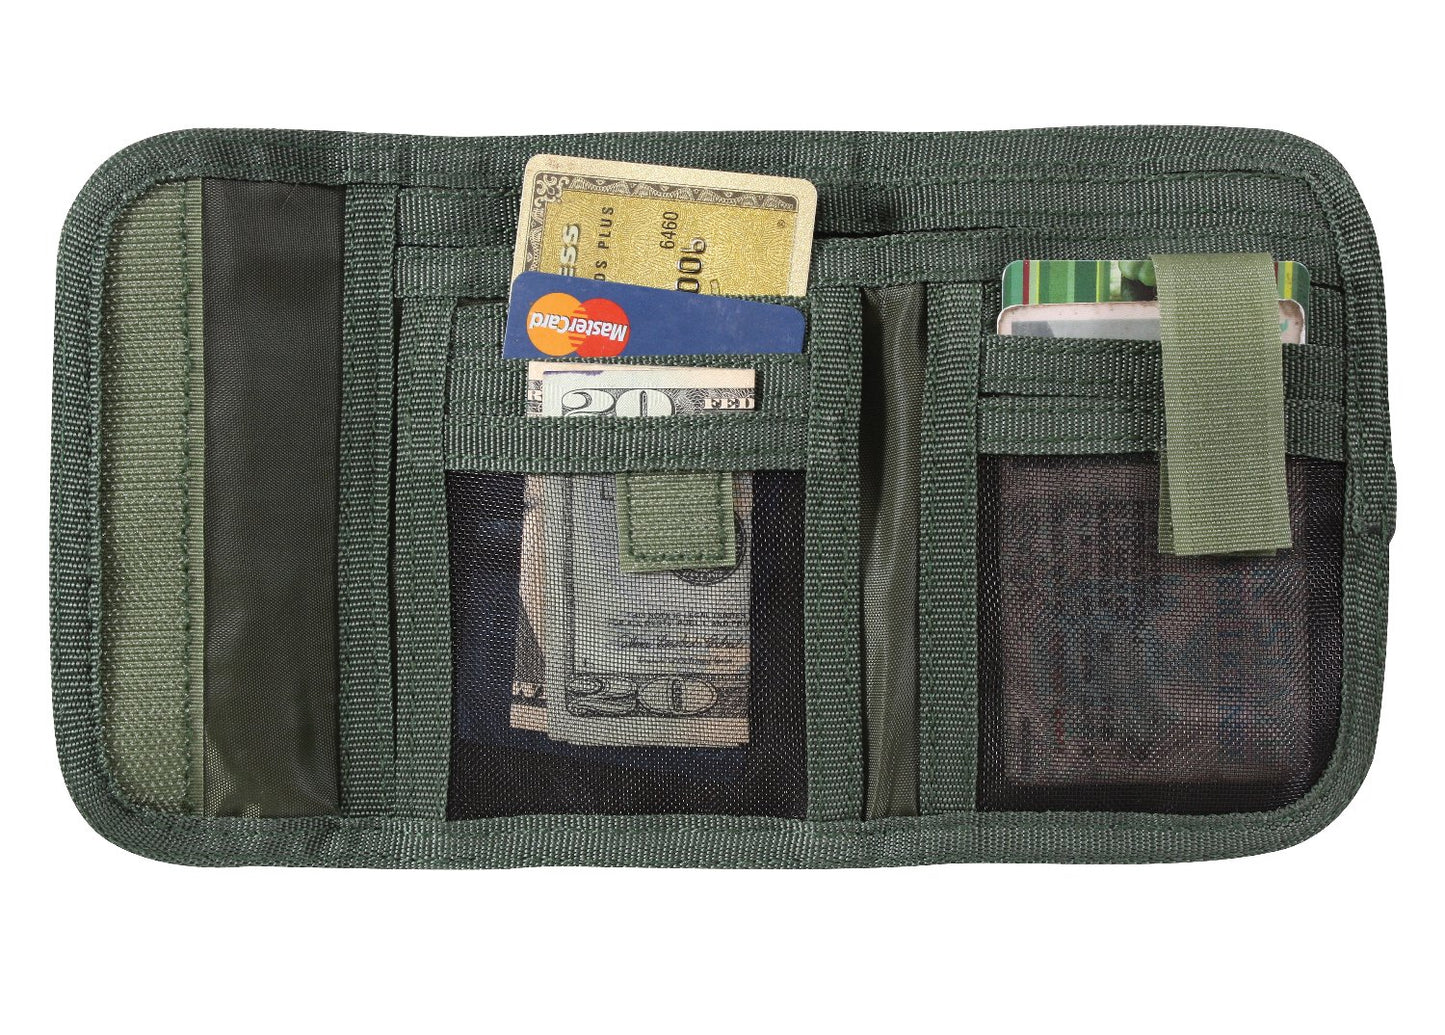 Rothco Deluxe Tri-Fold ID Wallet Camo